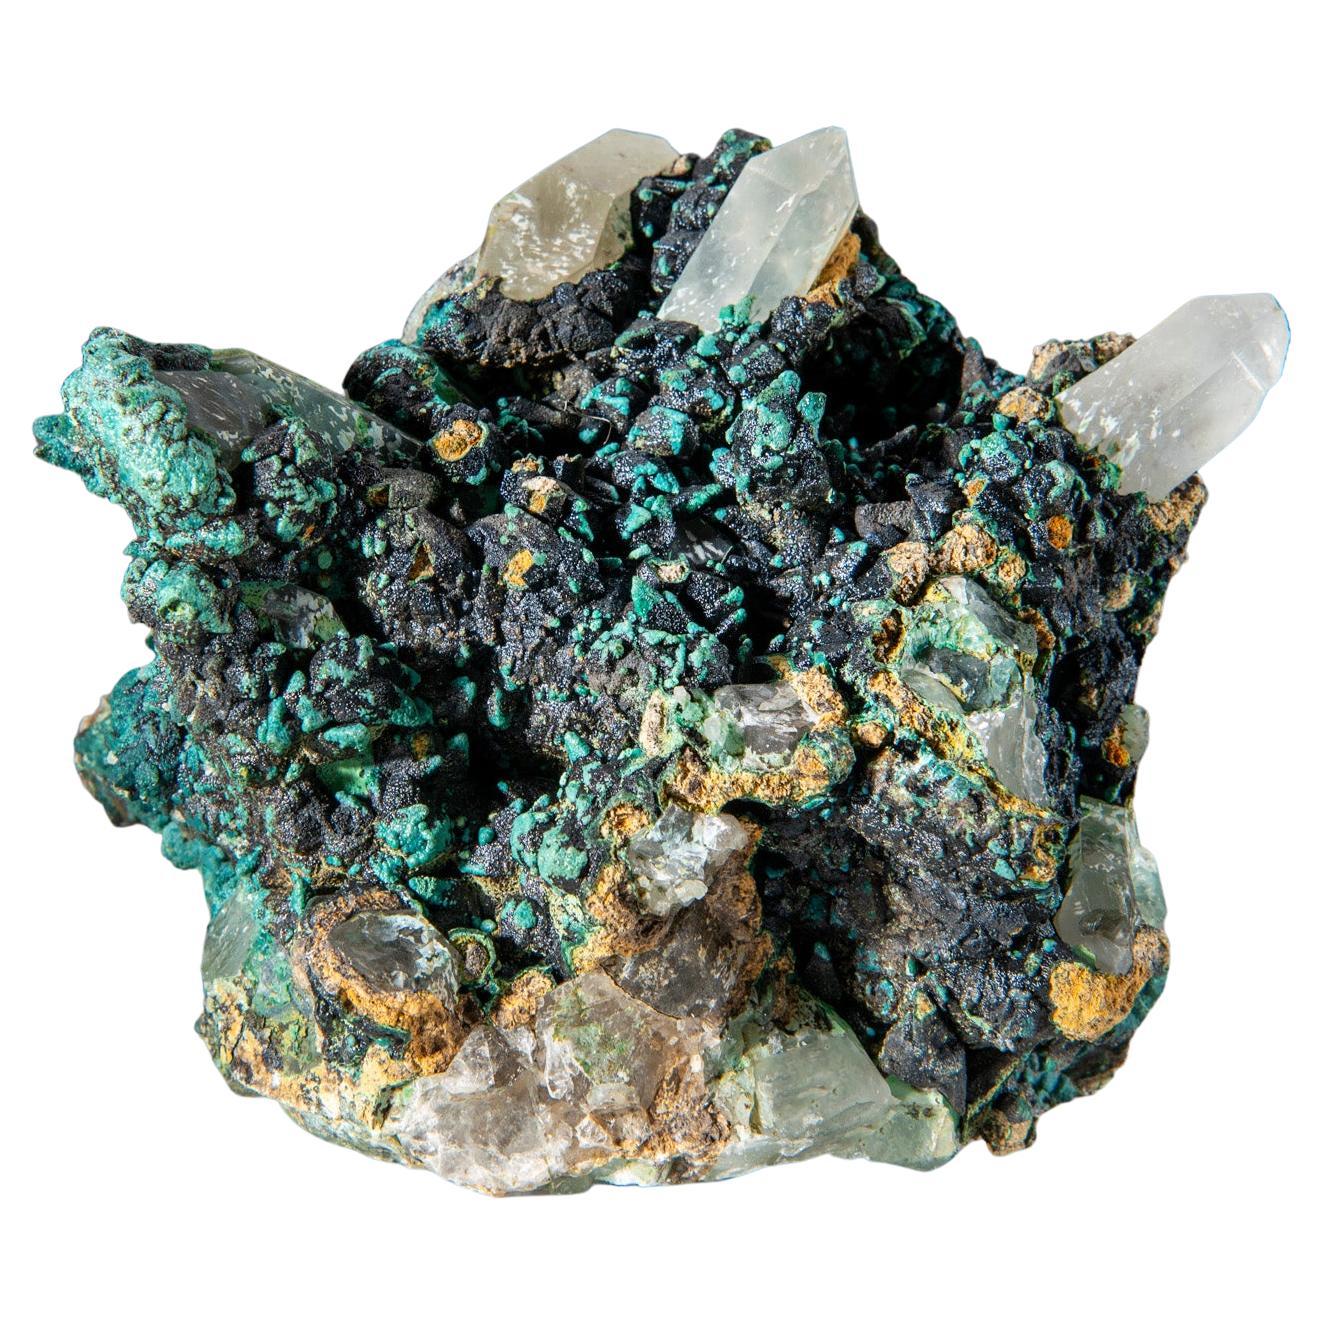 Chrysocolla over Quartz from Ray Mine, Mineral Creek District, Pinal County, Ari For Sale